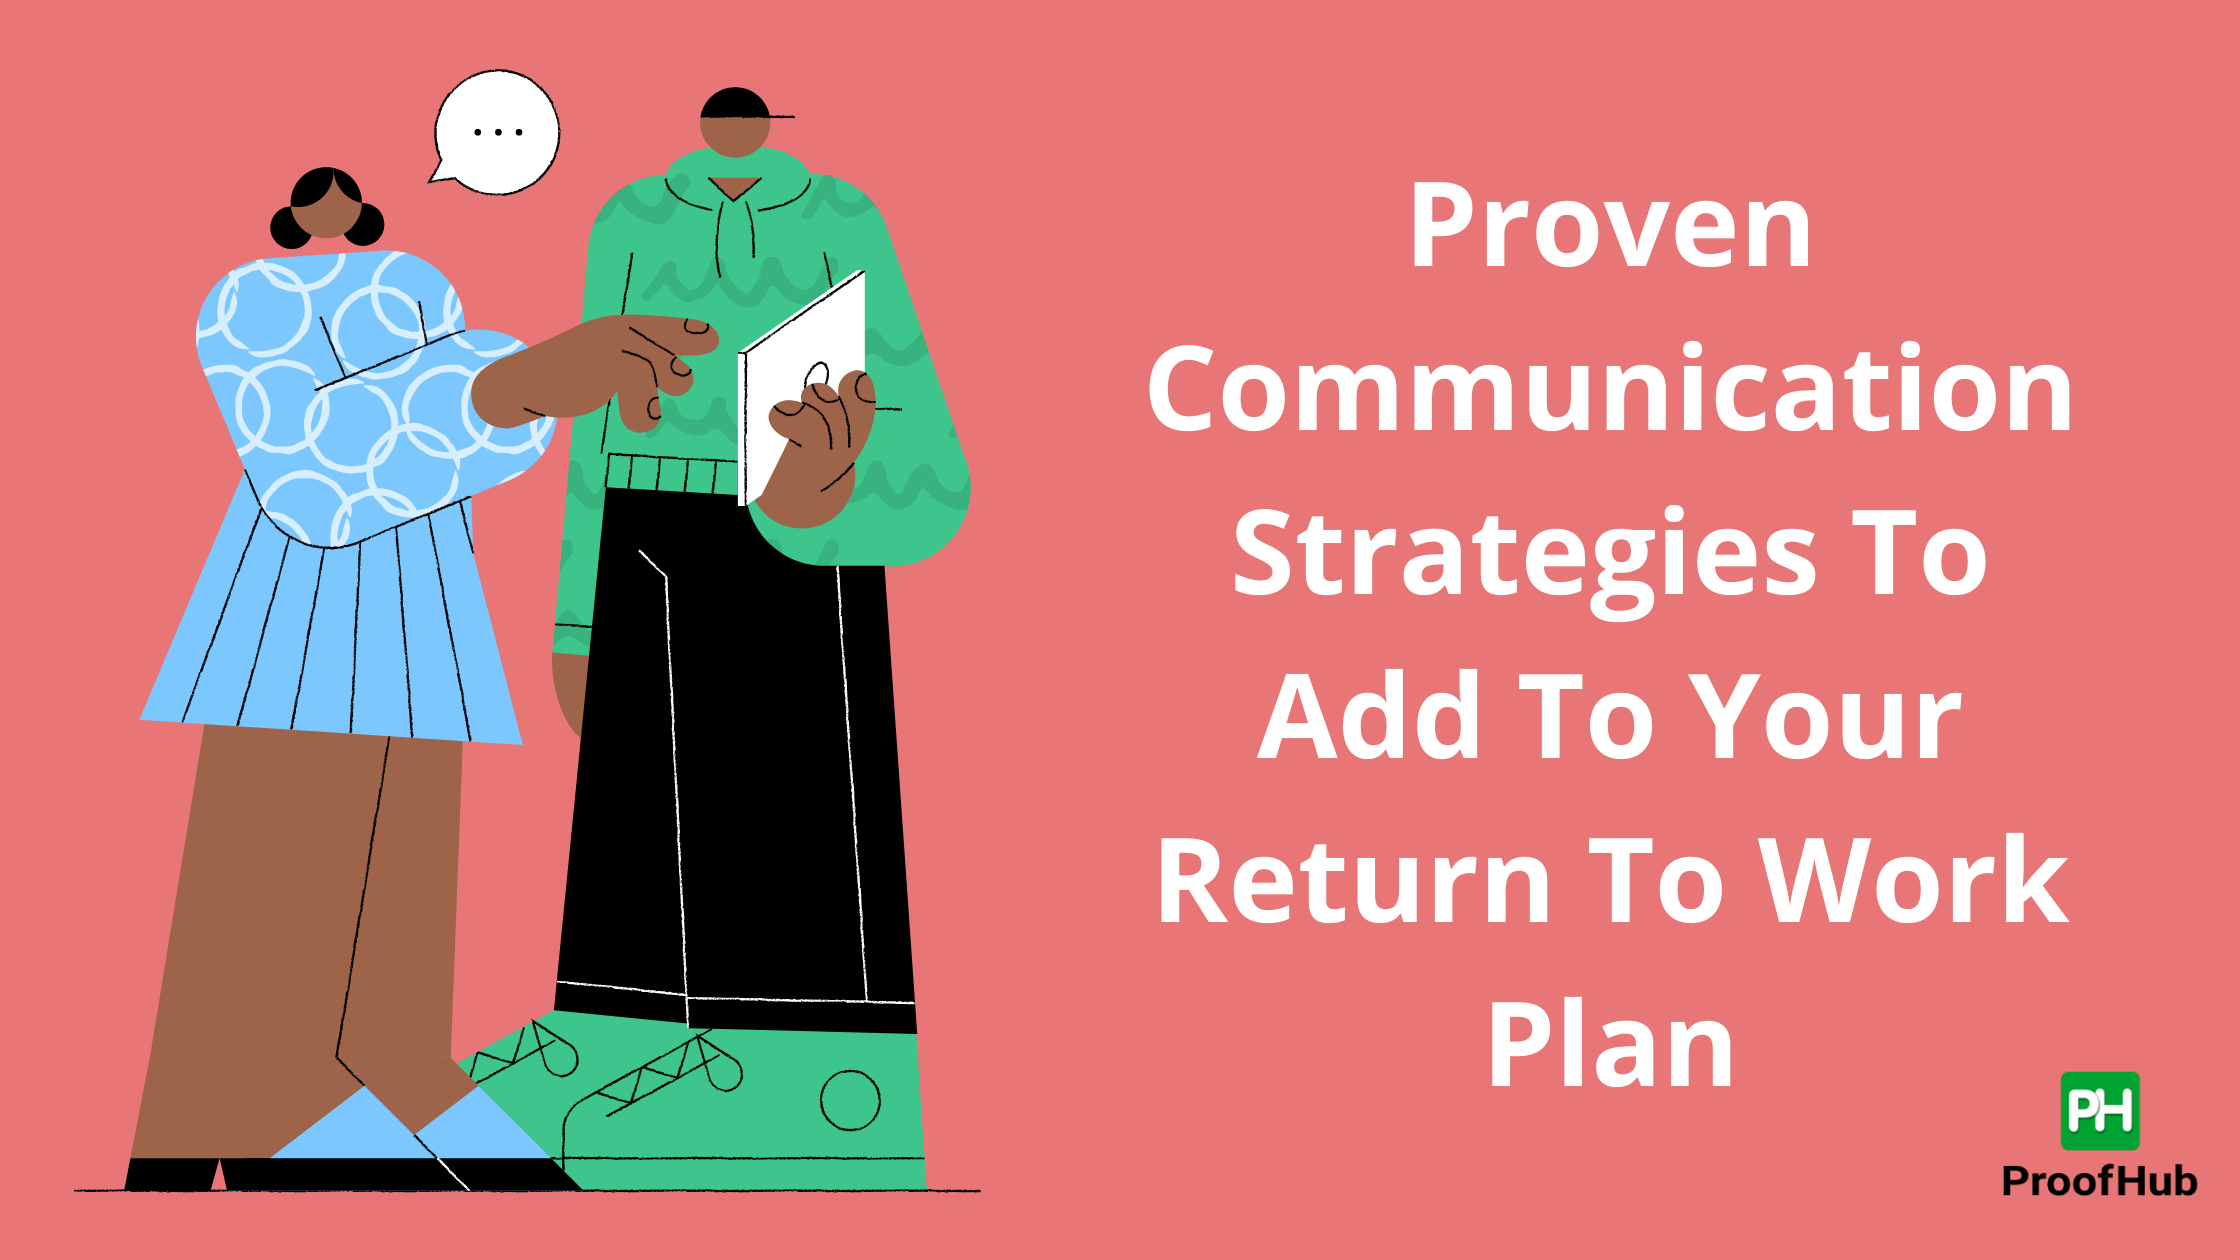 Proven Communication Strategies To Add To Your Return To Work Plan